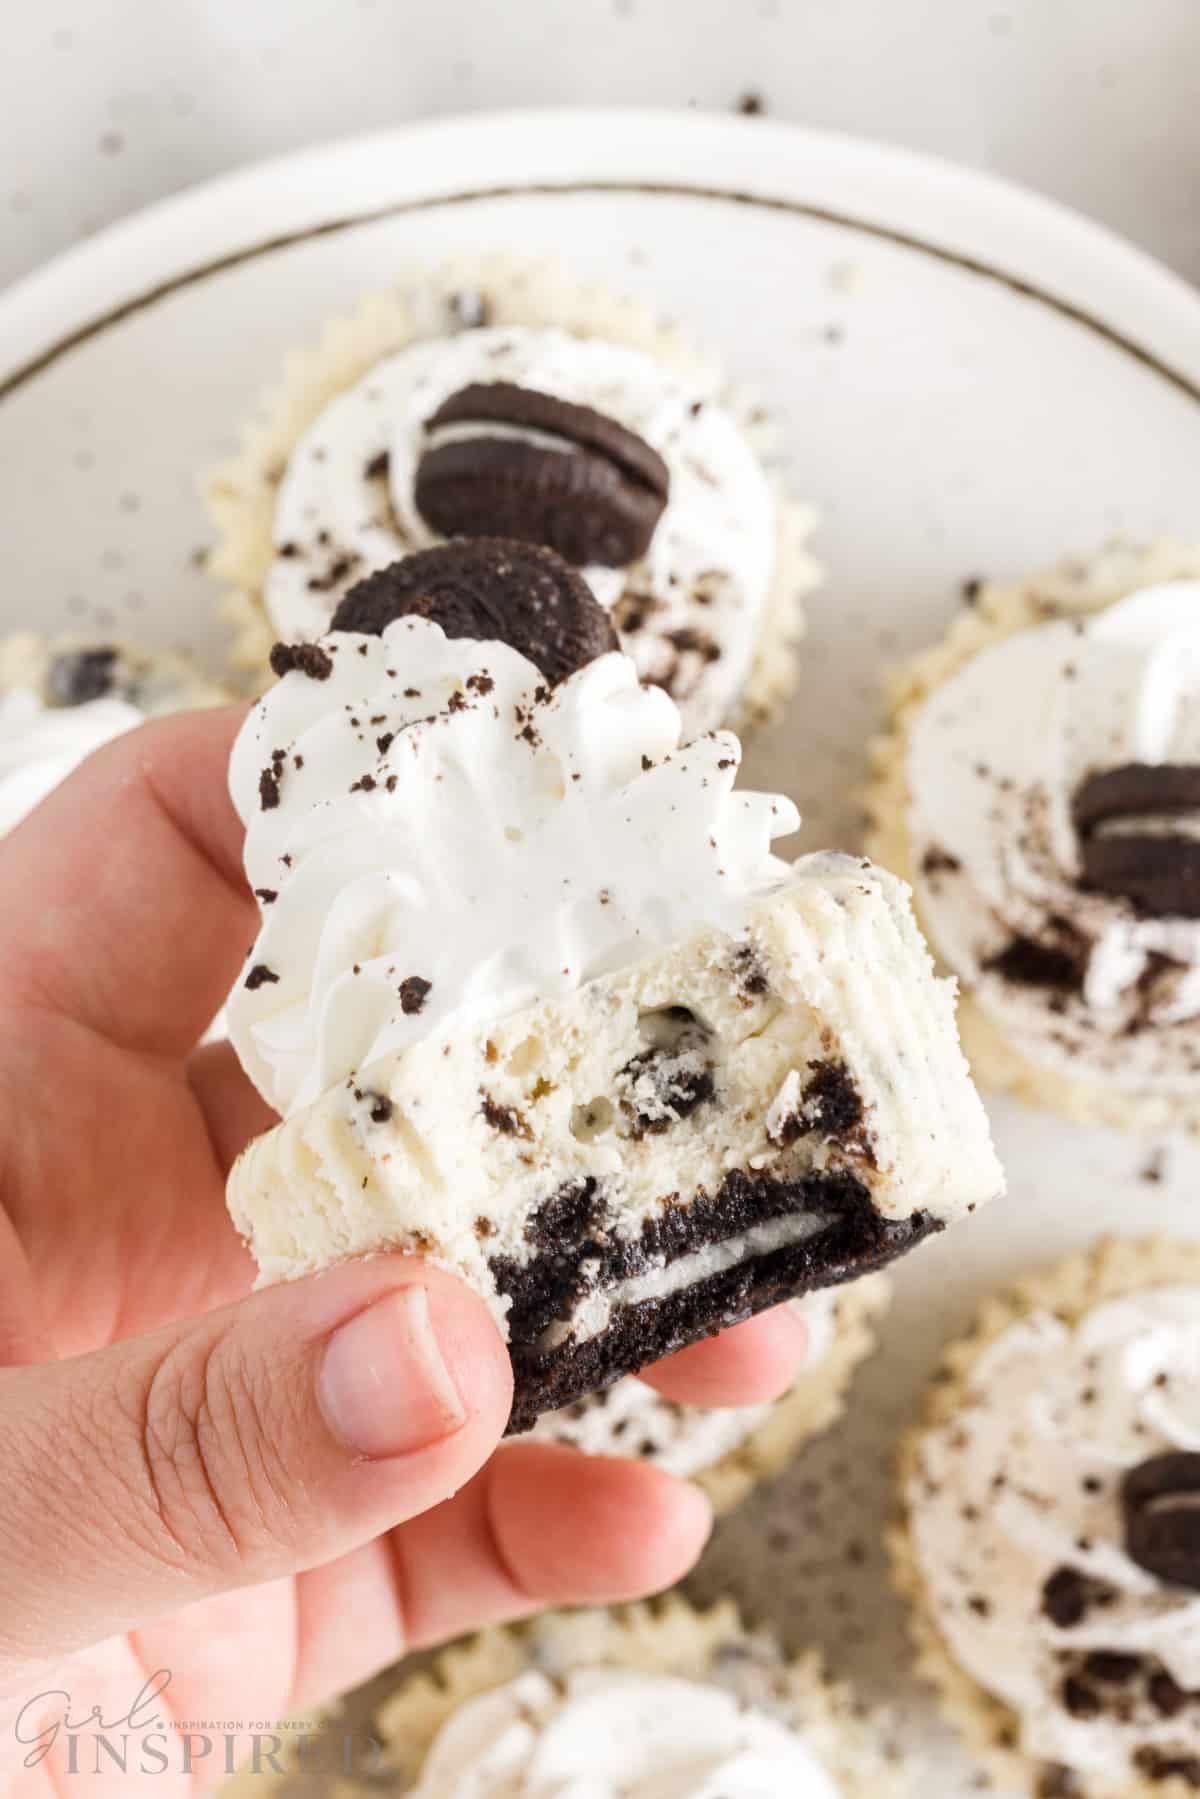 a mini oreo cheesecake being held with a slice taken from it over a plate of mini cheesecakes